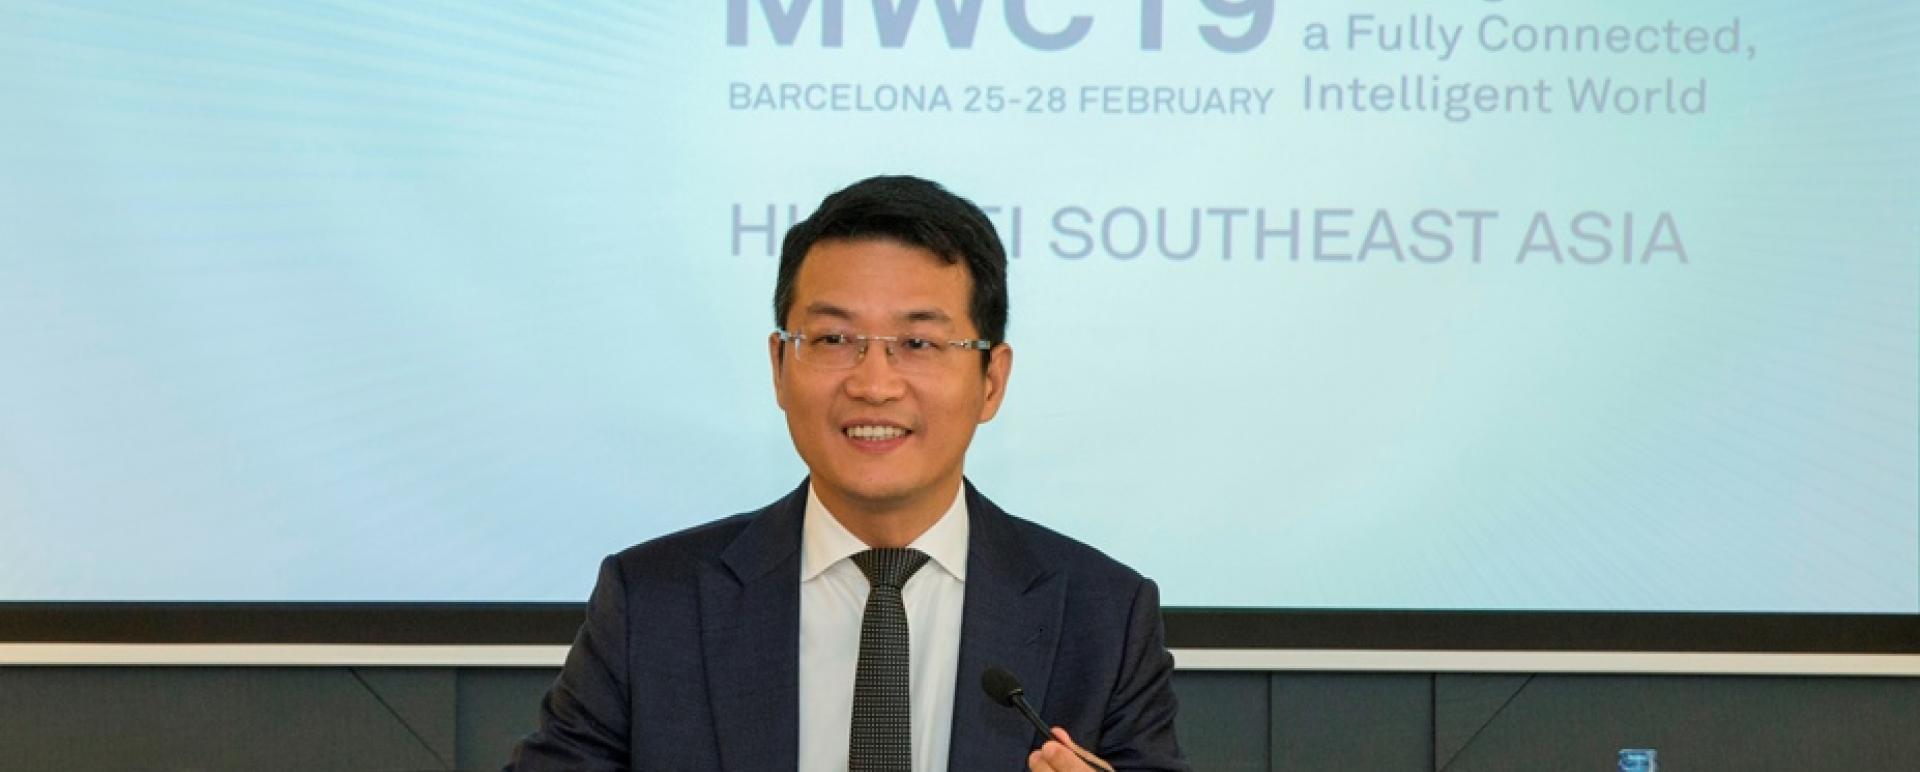 James Wu, president of Huawei Southeast Asia, explains about the firm’s success stories and prospects for the region at the Mobile World Congress2019 held in Barcelona, Spain 